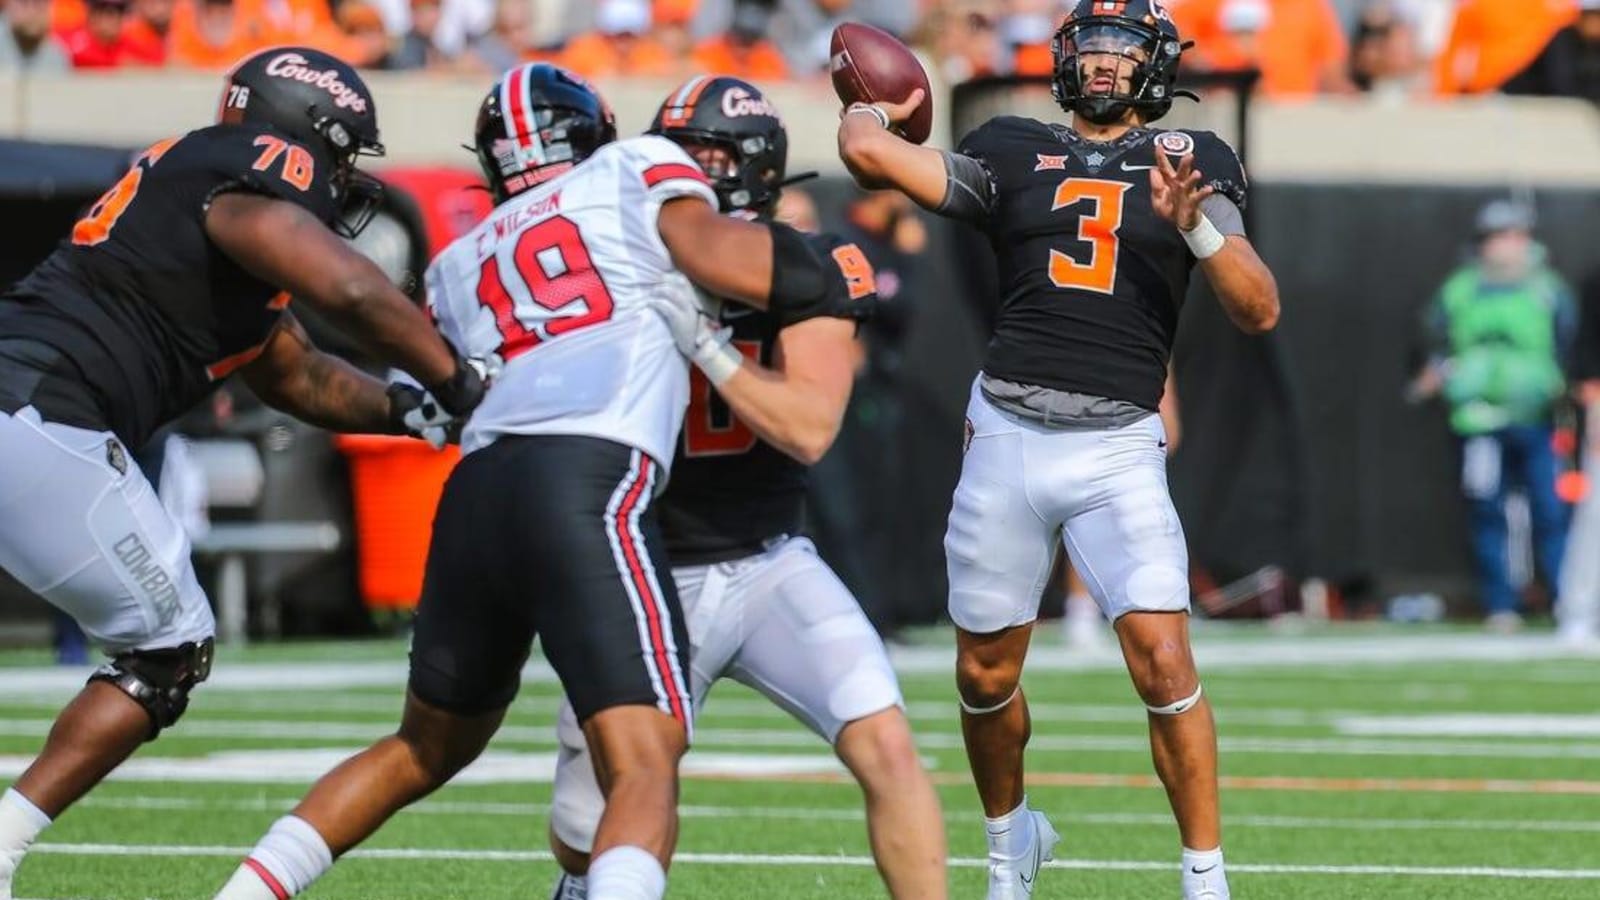 Late surge lifts No. 7 Oklahoma State over Texas Tech